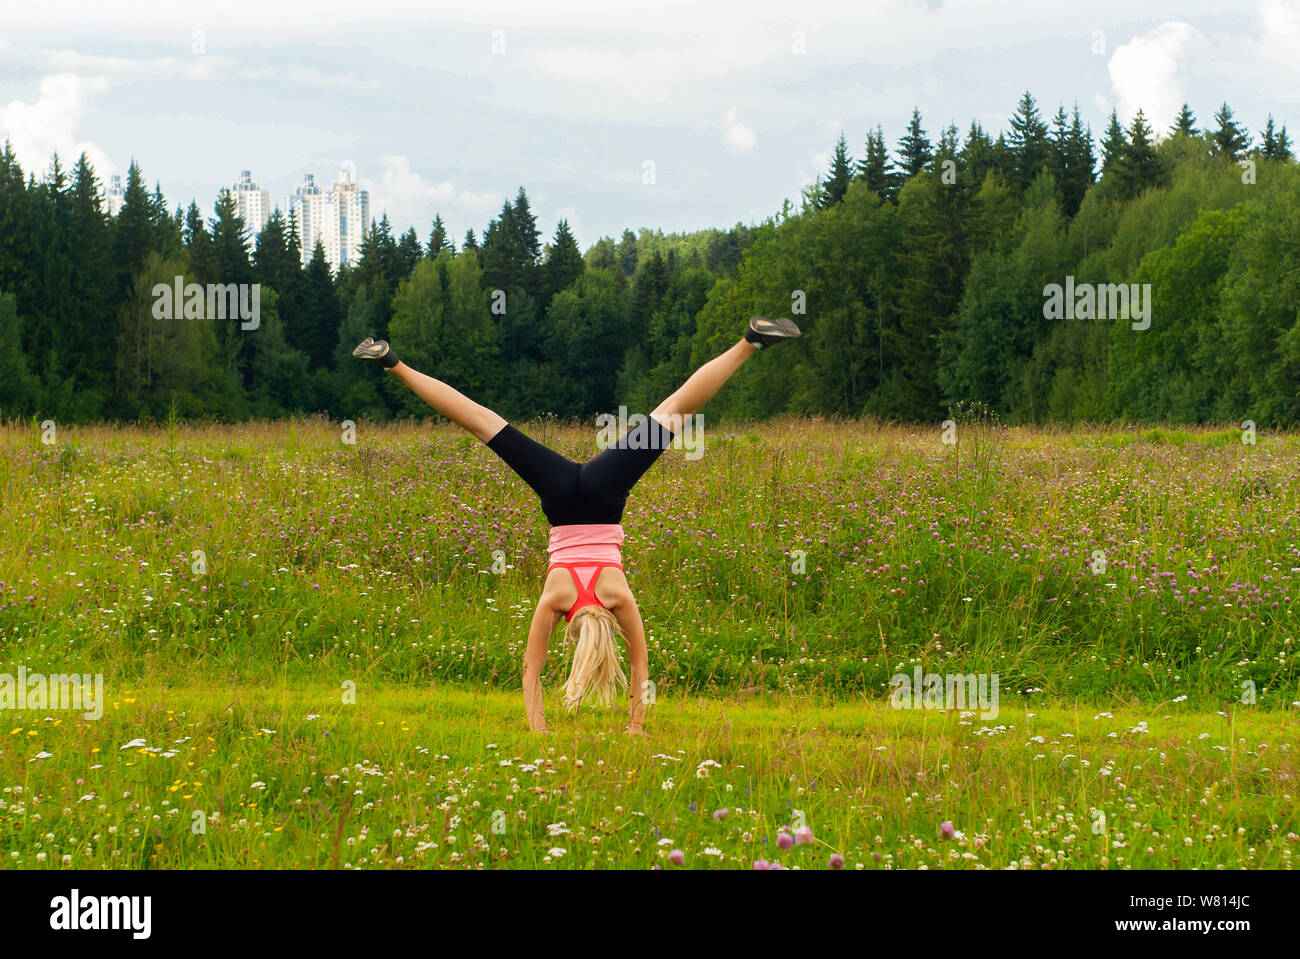 young woman doing somersault cartwheel outdoors in a meadow outside the city Stock Photo